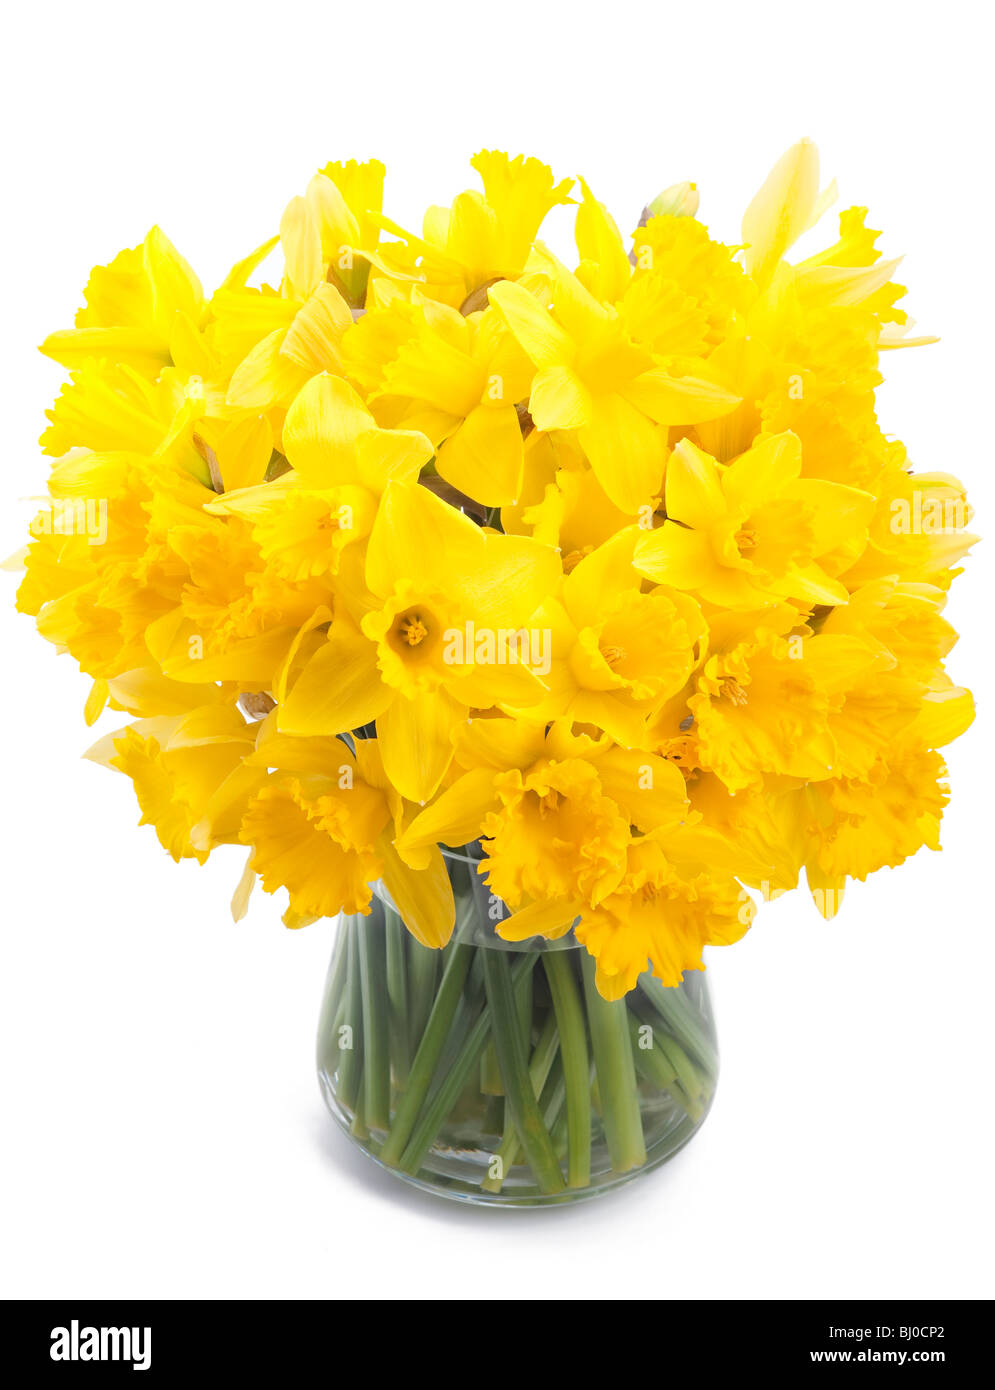 Vase of blooming yellow daffodils against white cutout studio background Stock Photo